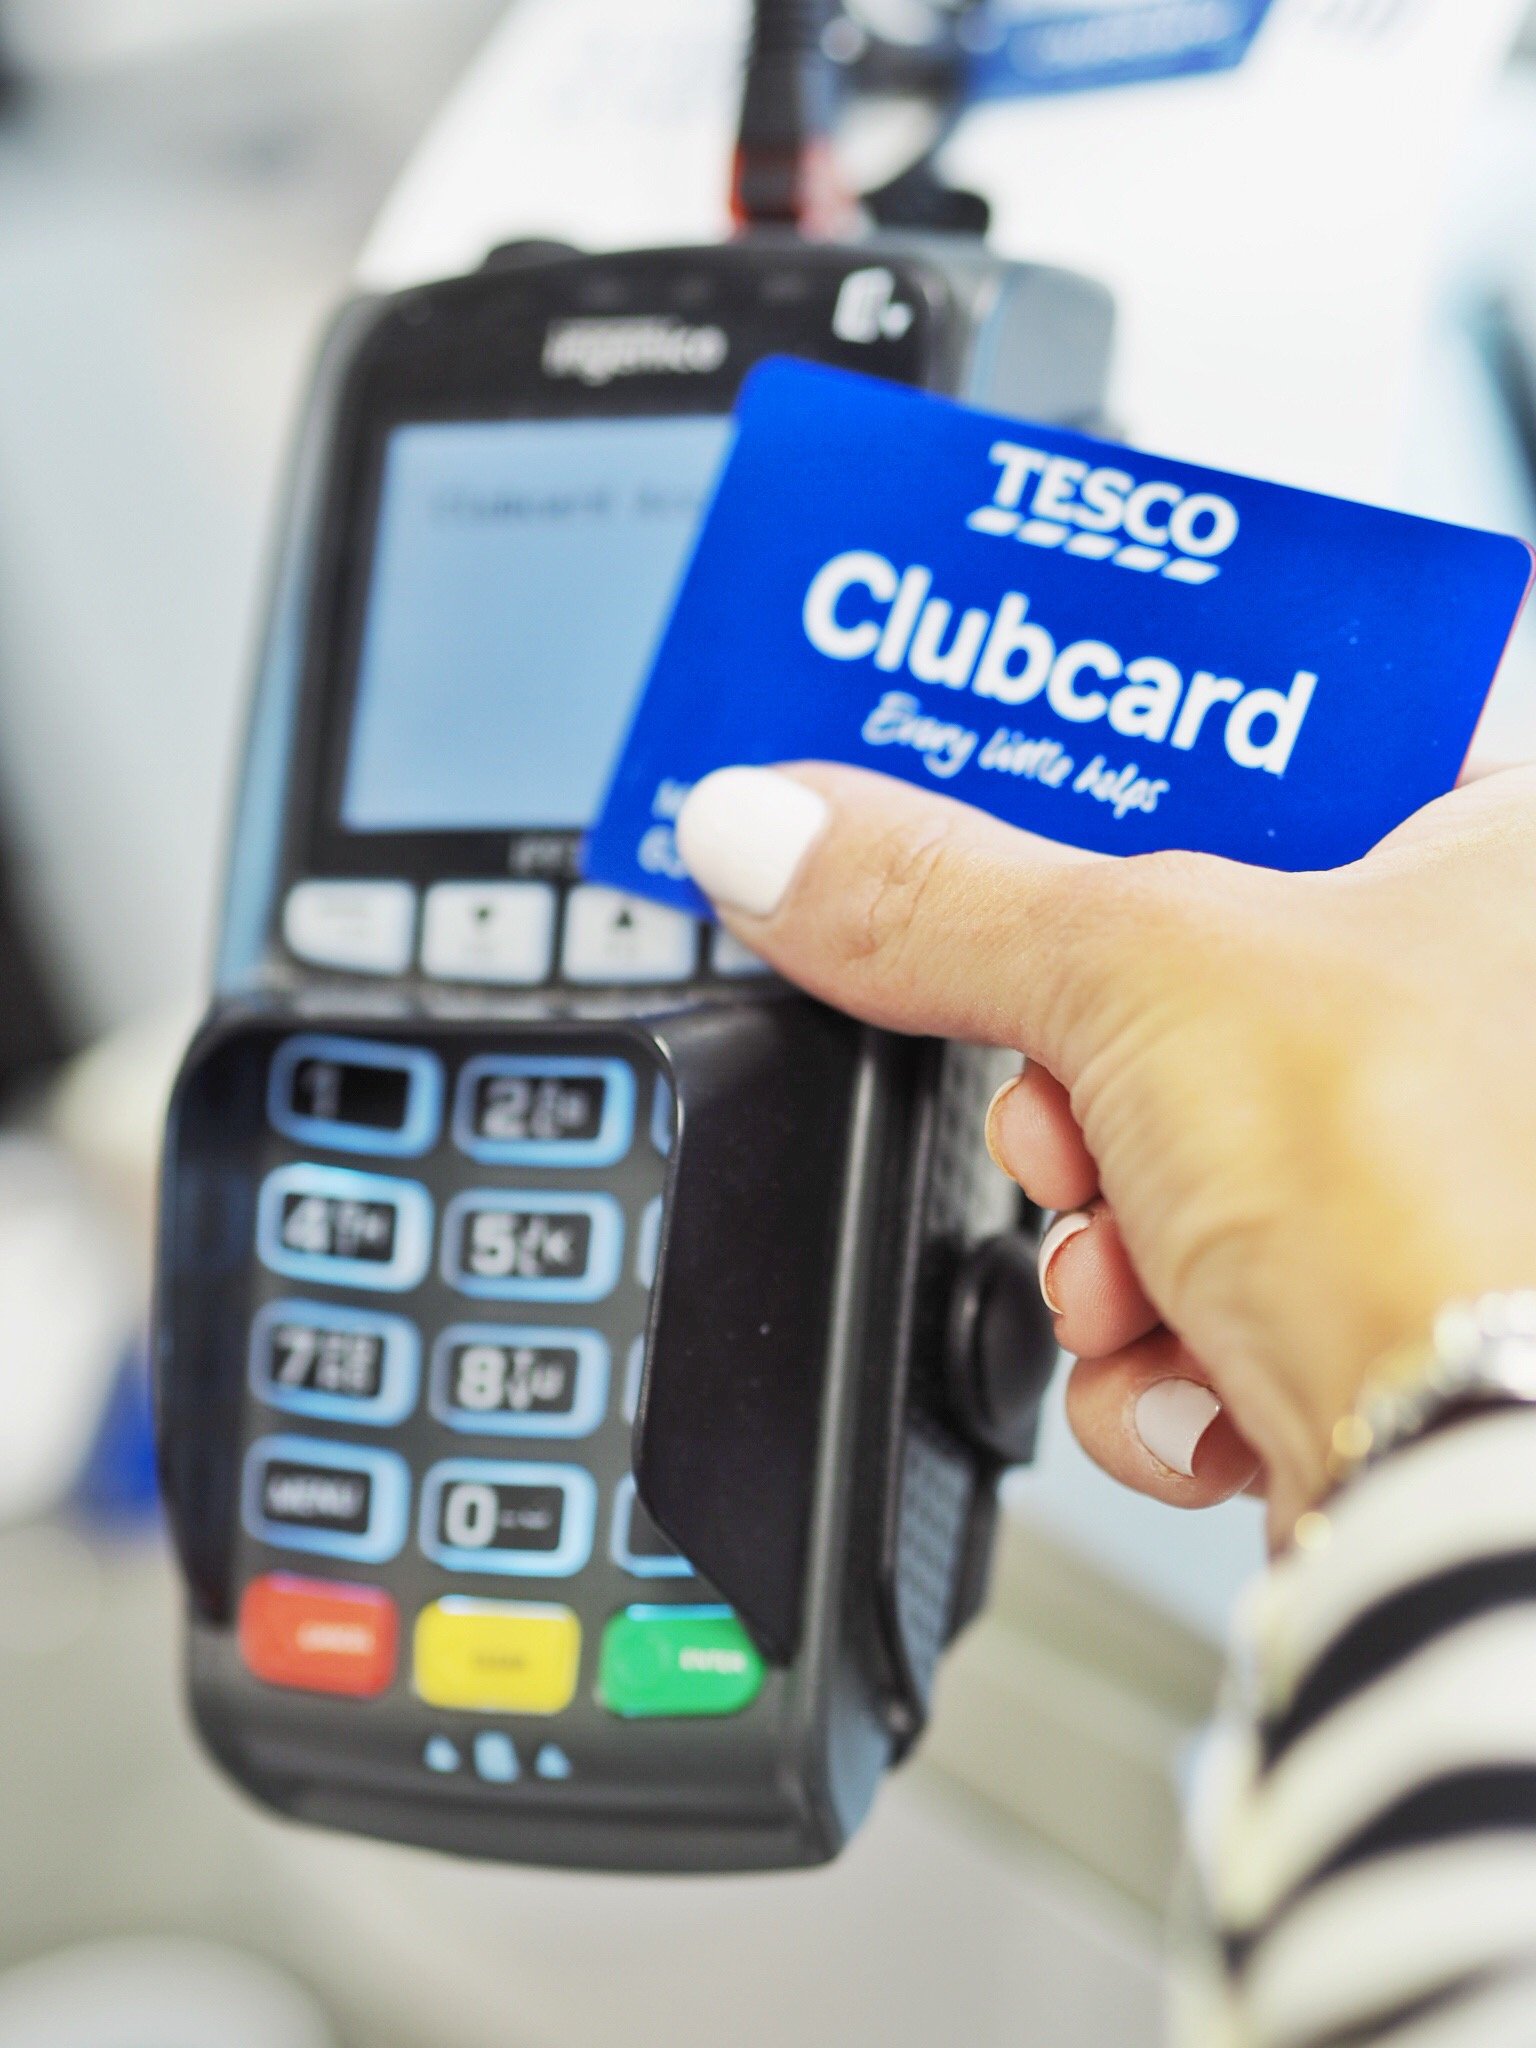 Tesco hits big plans for Clubcard to better link grocery, mobile and banking